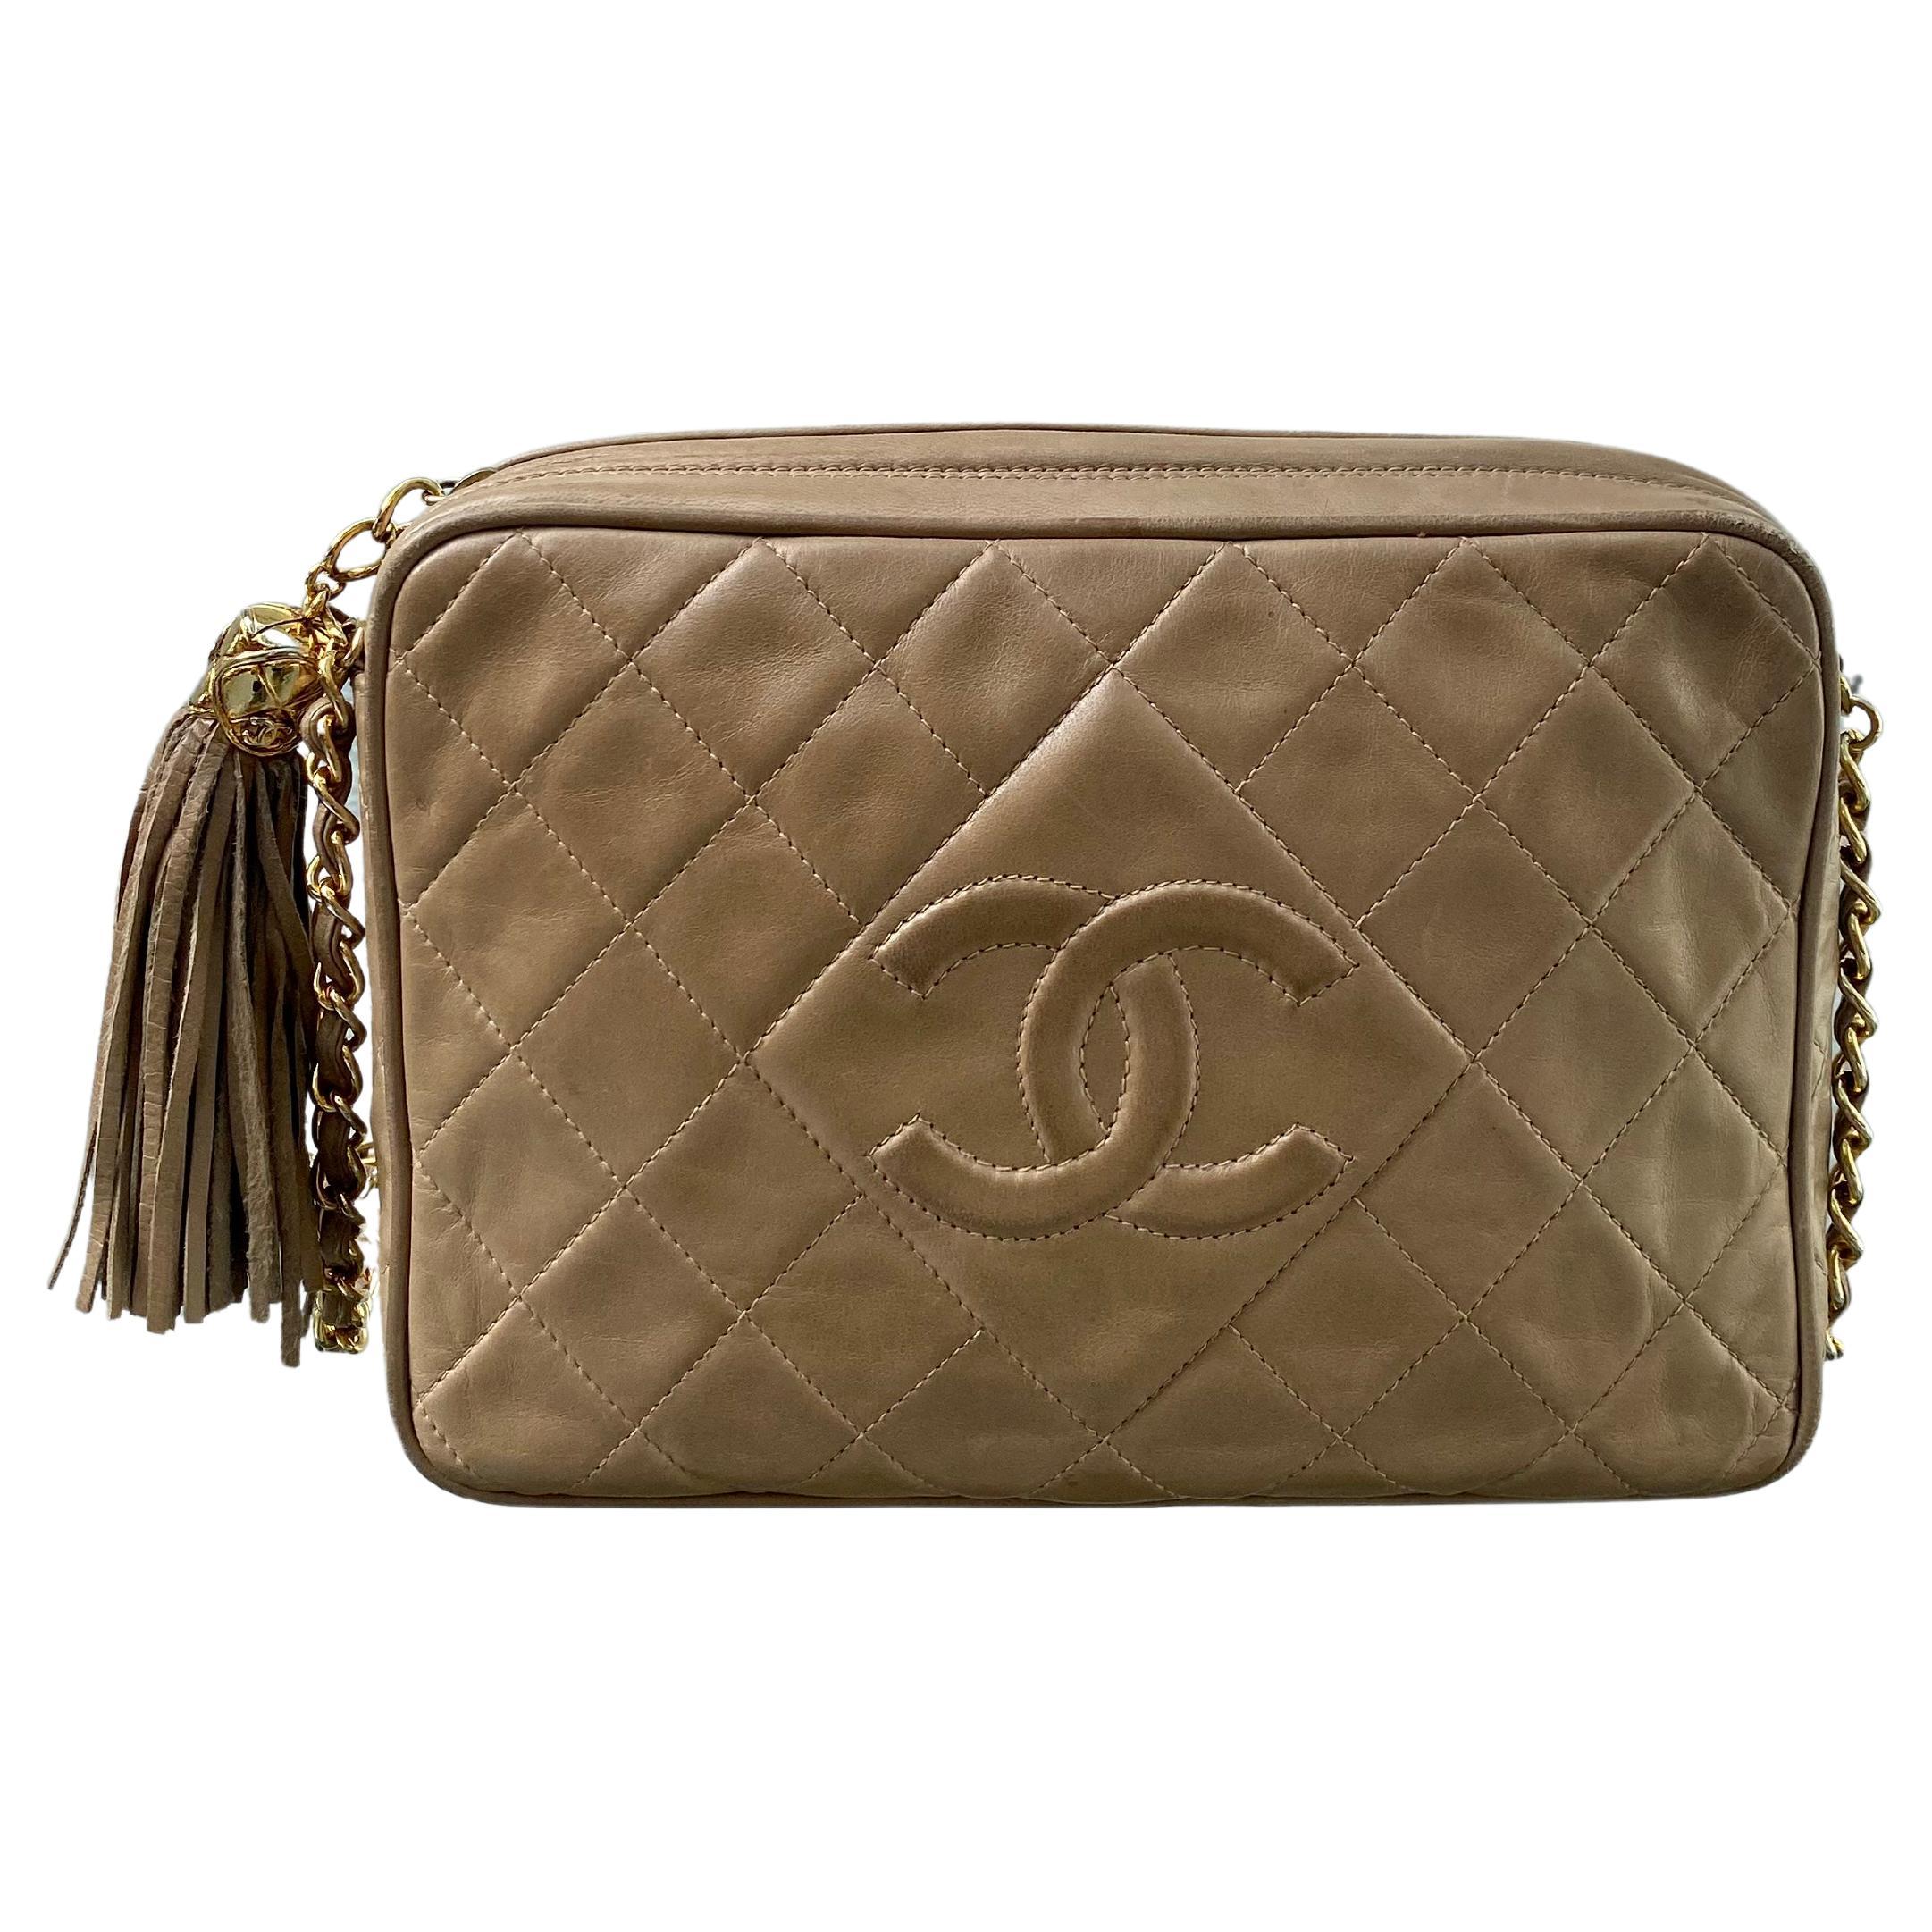 Chanel Vintage Beige Quilted Lambskin Camera Crossbody Bag For Sale